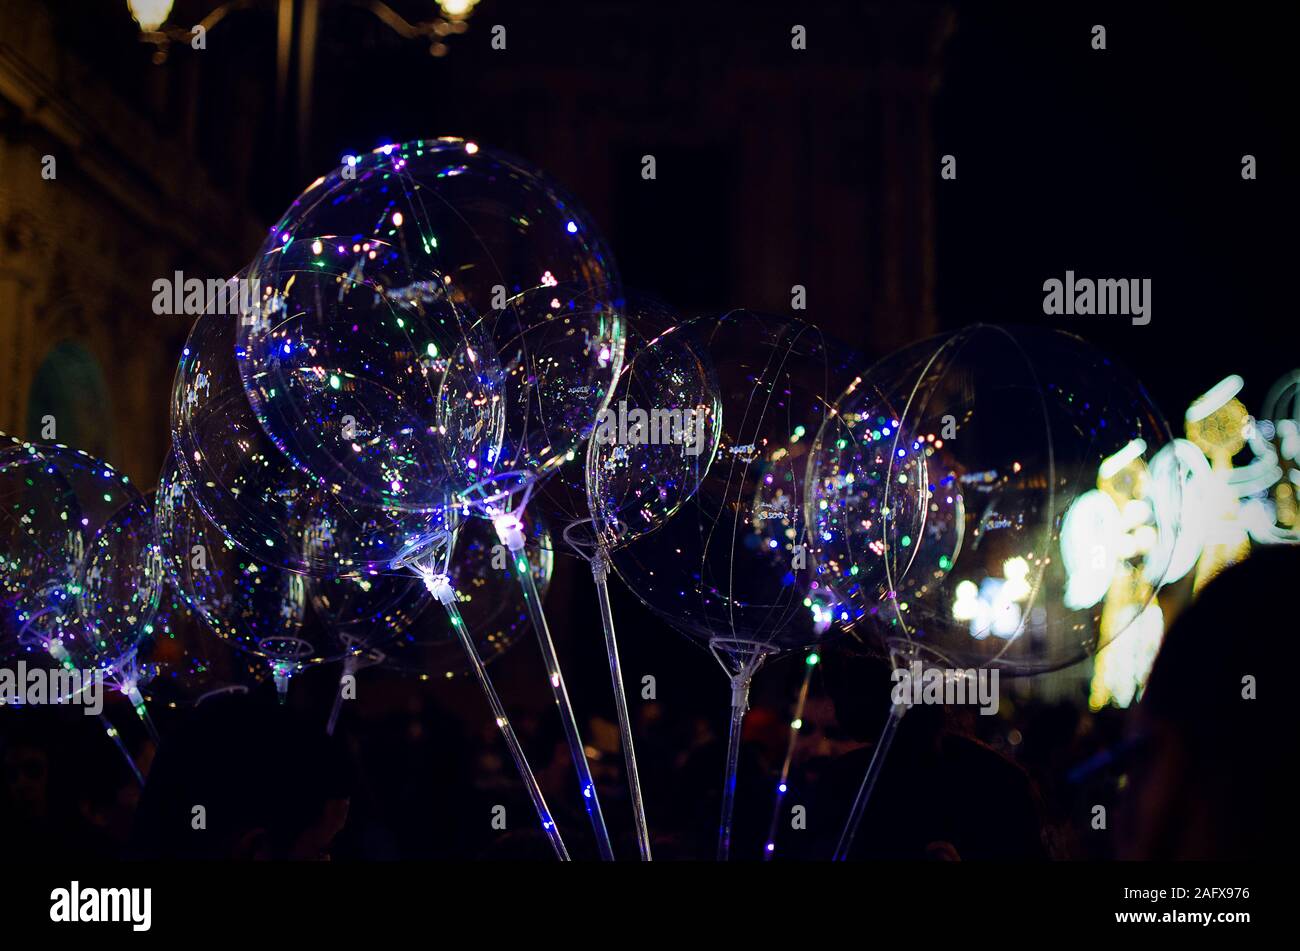 Selective focus on LED balloons with Christmas decorations in the background in Plaza San Francisco, Seville, Spain Stock Photo